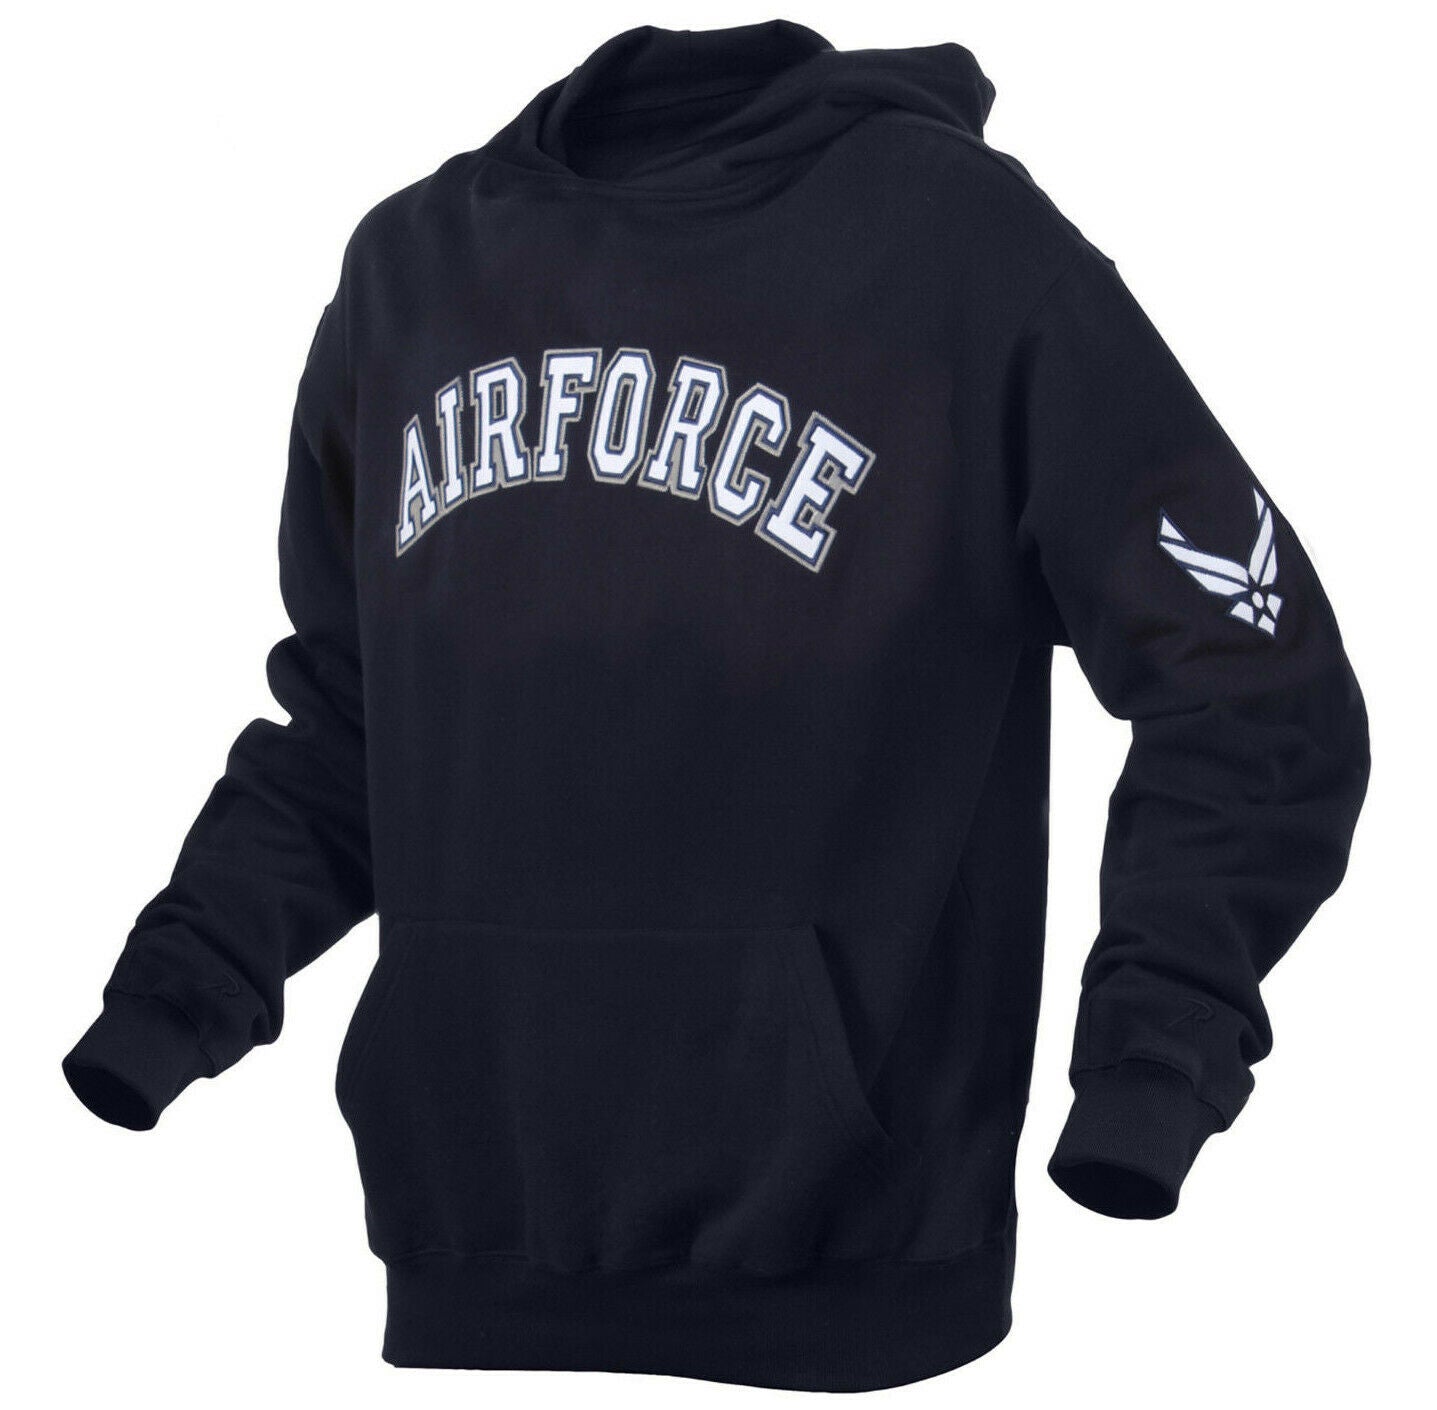 Rothco Military Embroidered Pullover Hoodies - Air Force